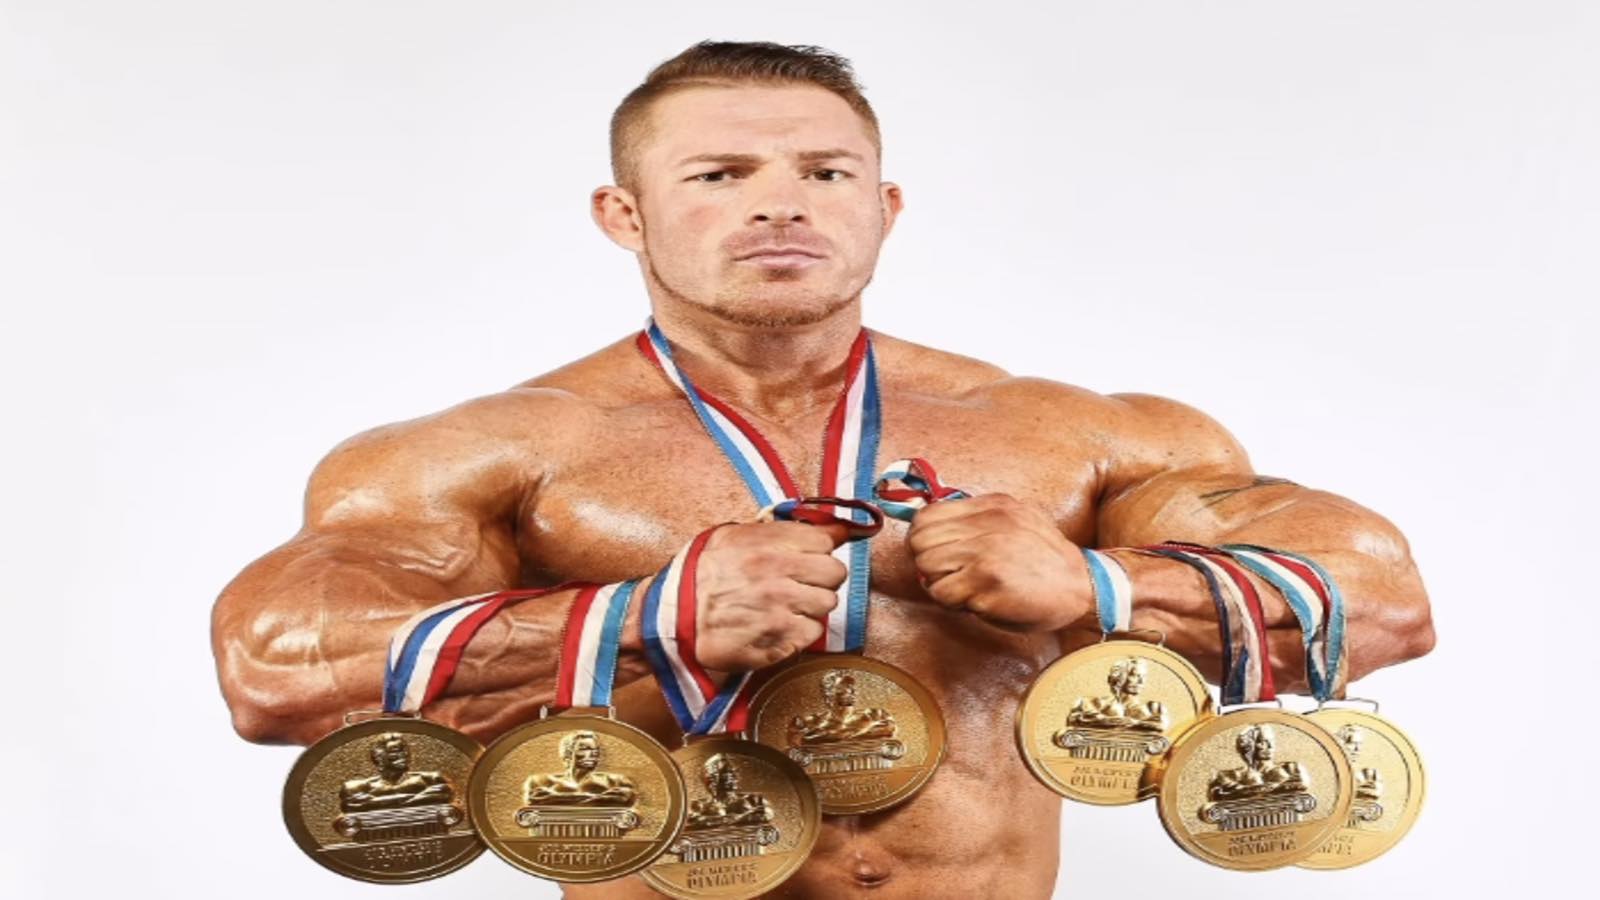 2018 Olympia 212 Bodybuilding Winner Flex Lewis After Contest Interview  With Tony Doherty - NPC News Online